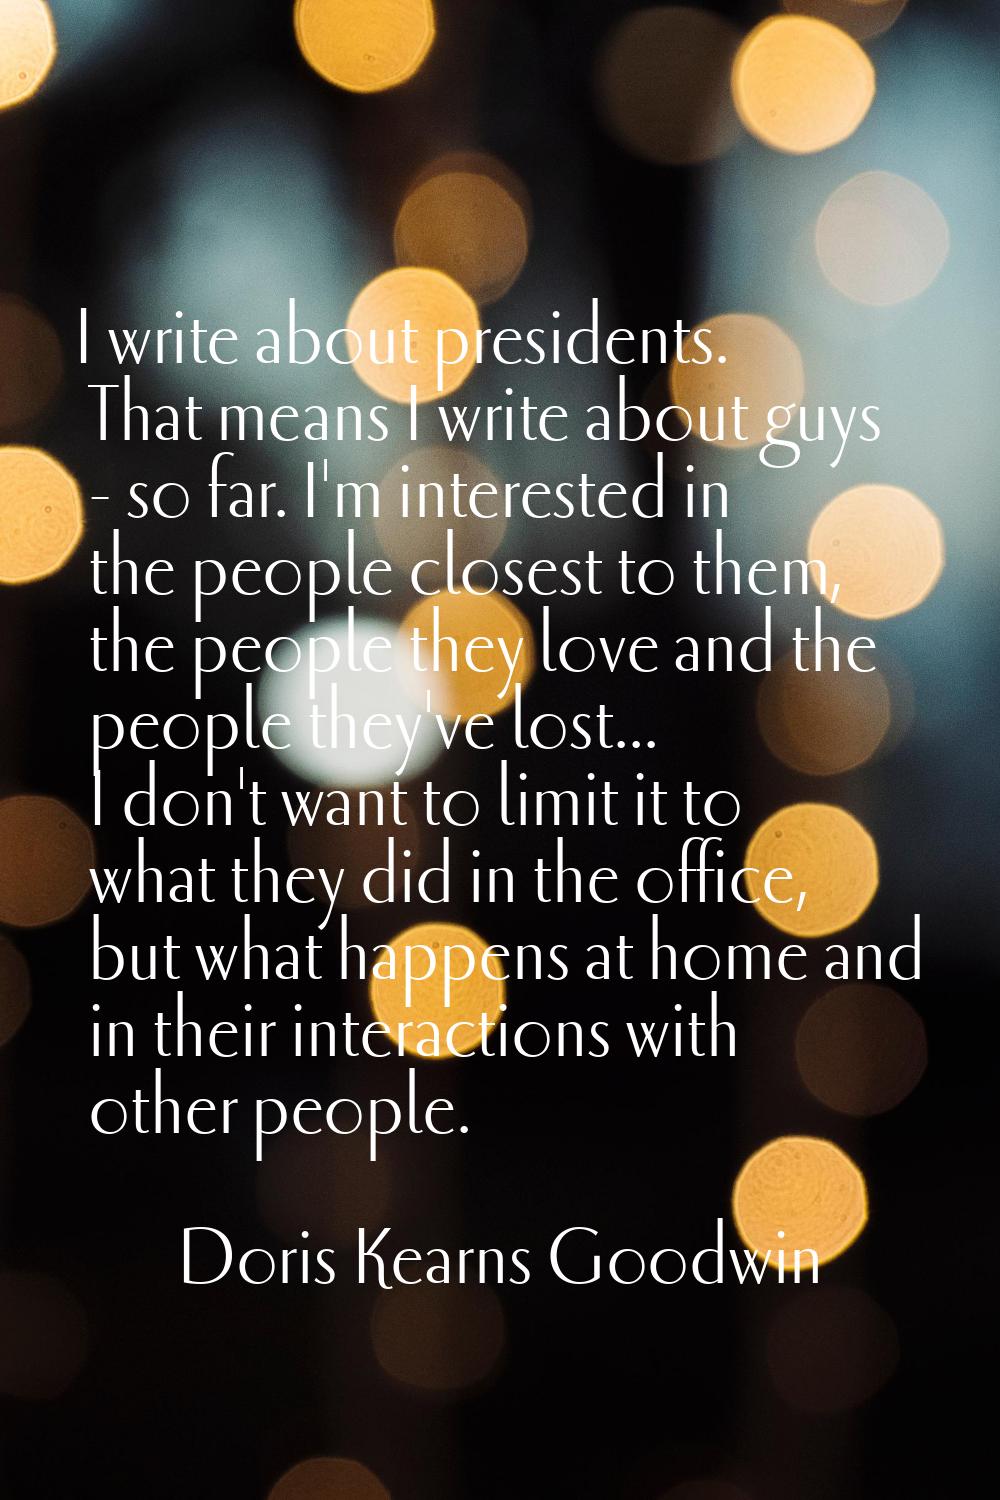 I write about presidents. That means I write about guys - so far. I'm interested in the people clos